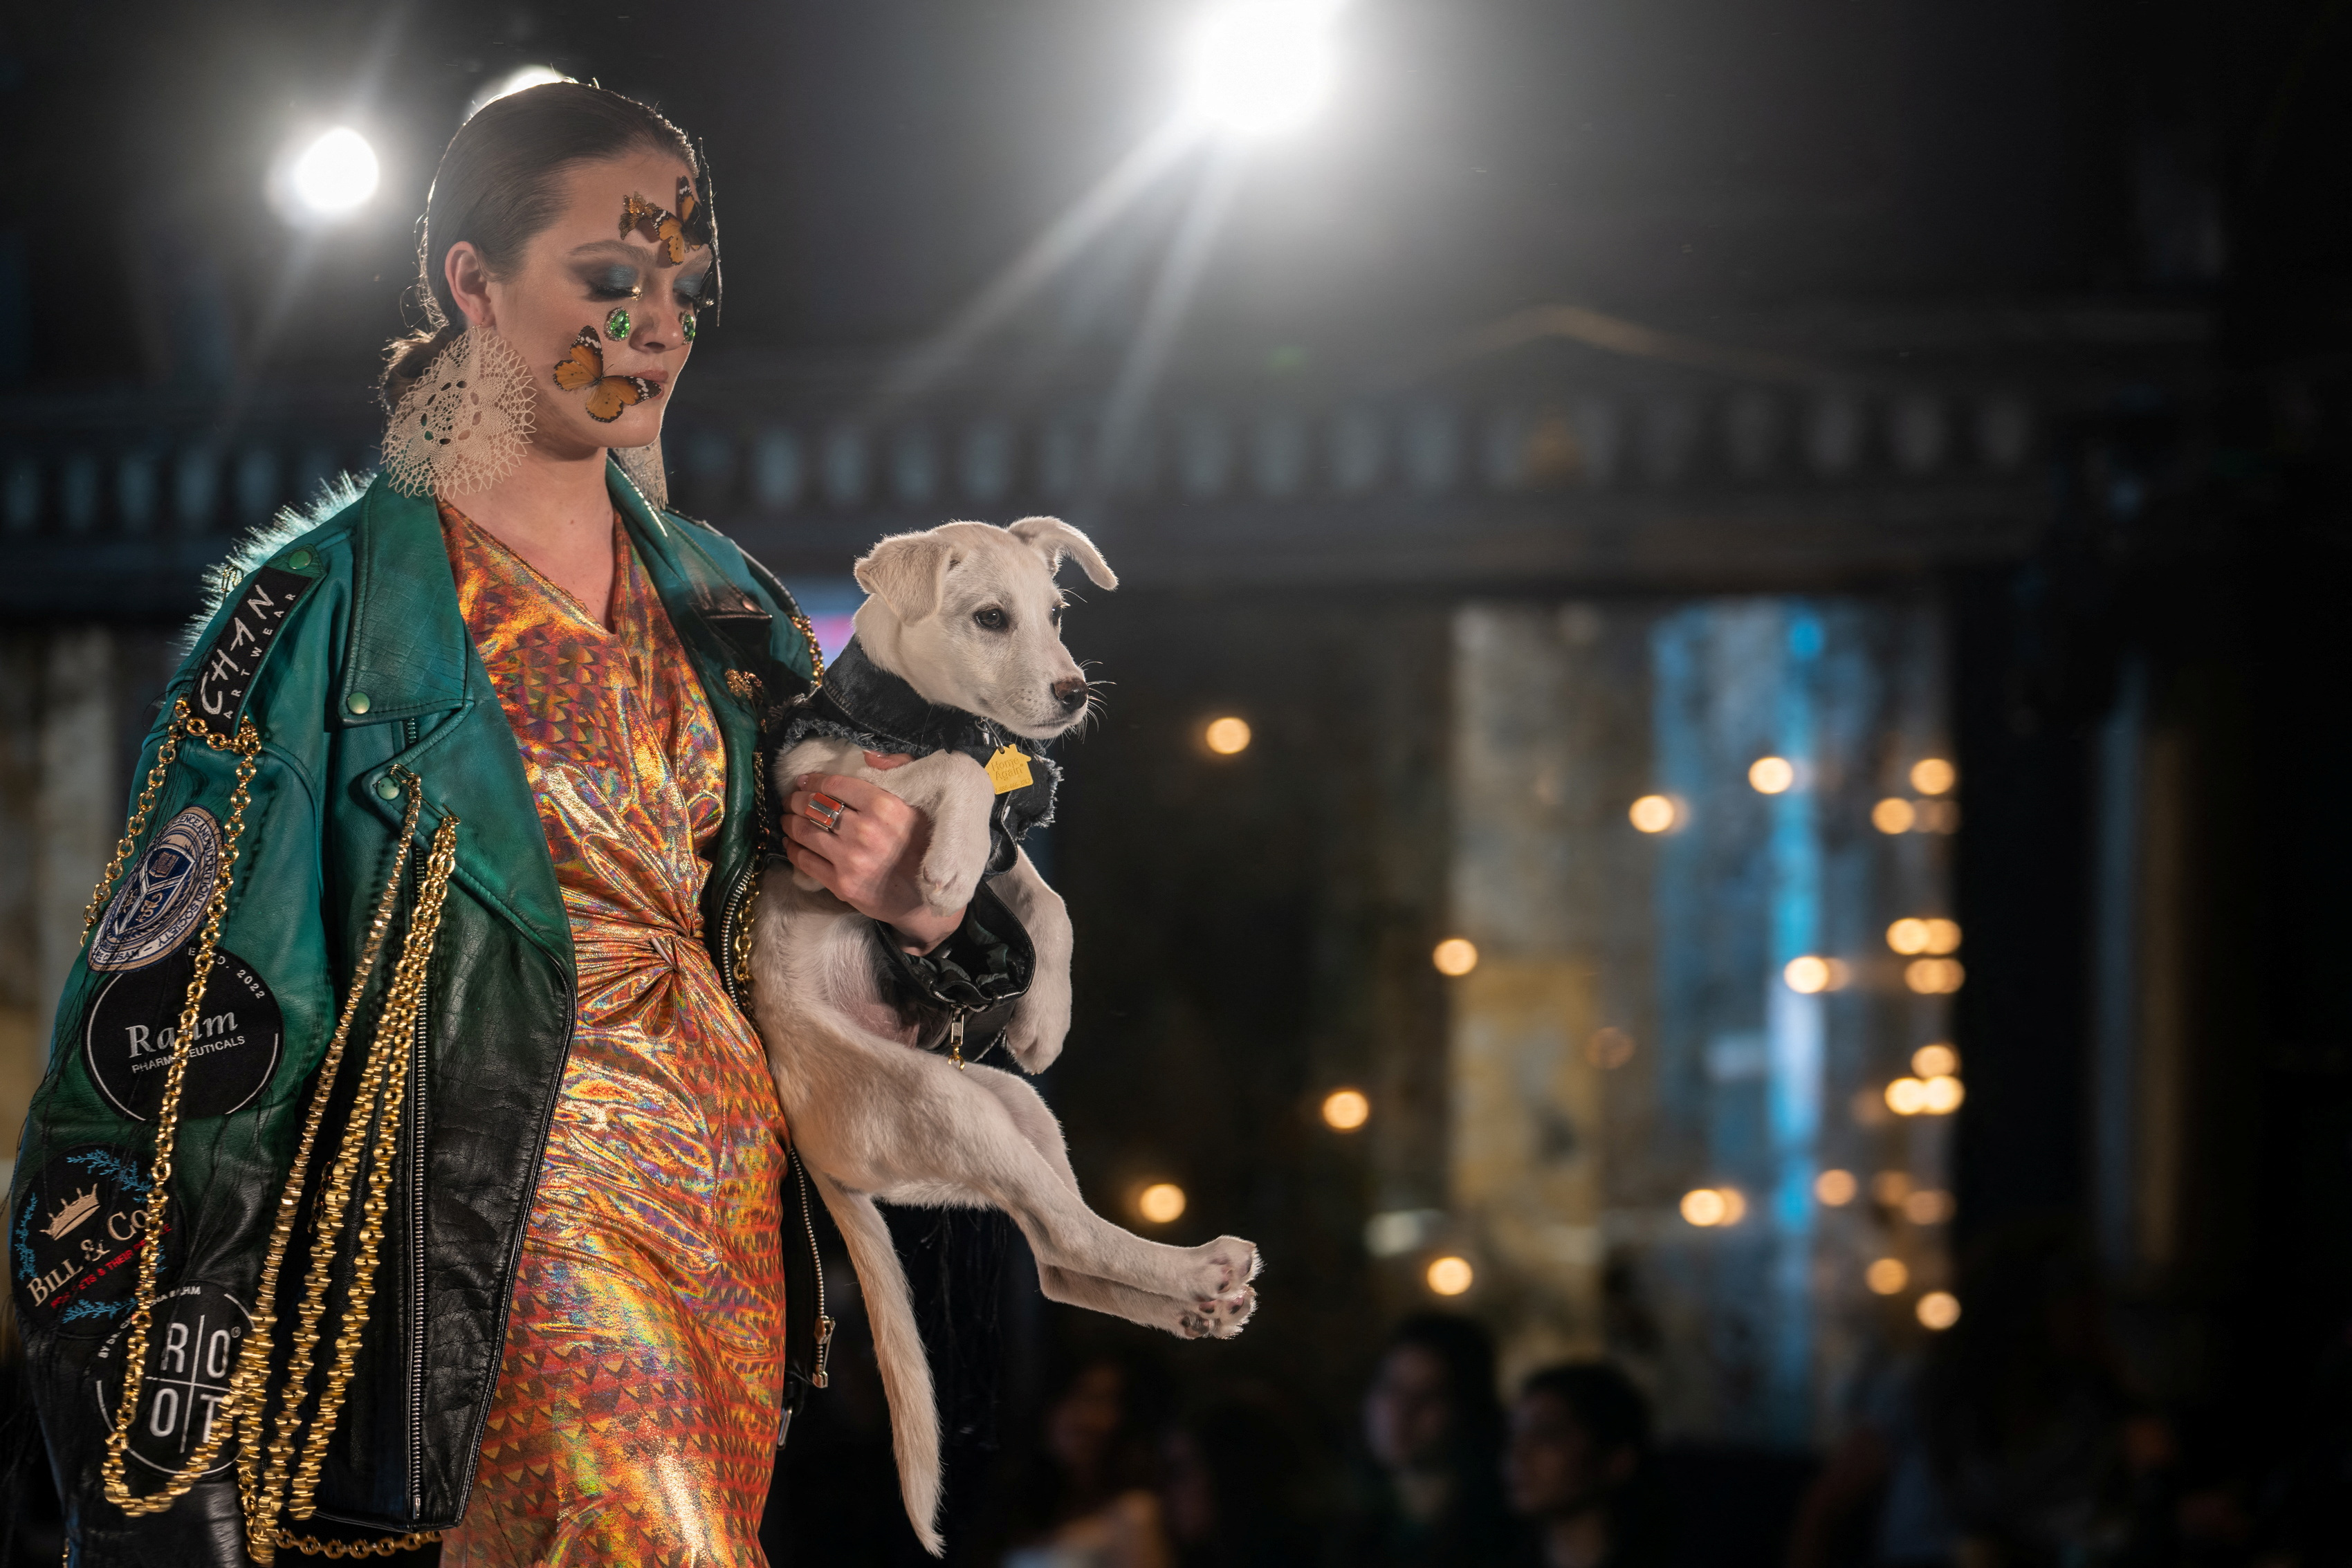 A model walks with a dog during the CatWalk FurBaby show during the New York Fashion Week in New York